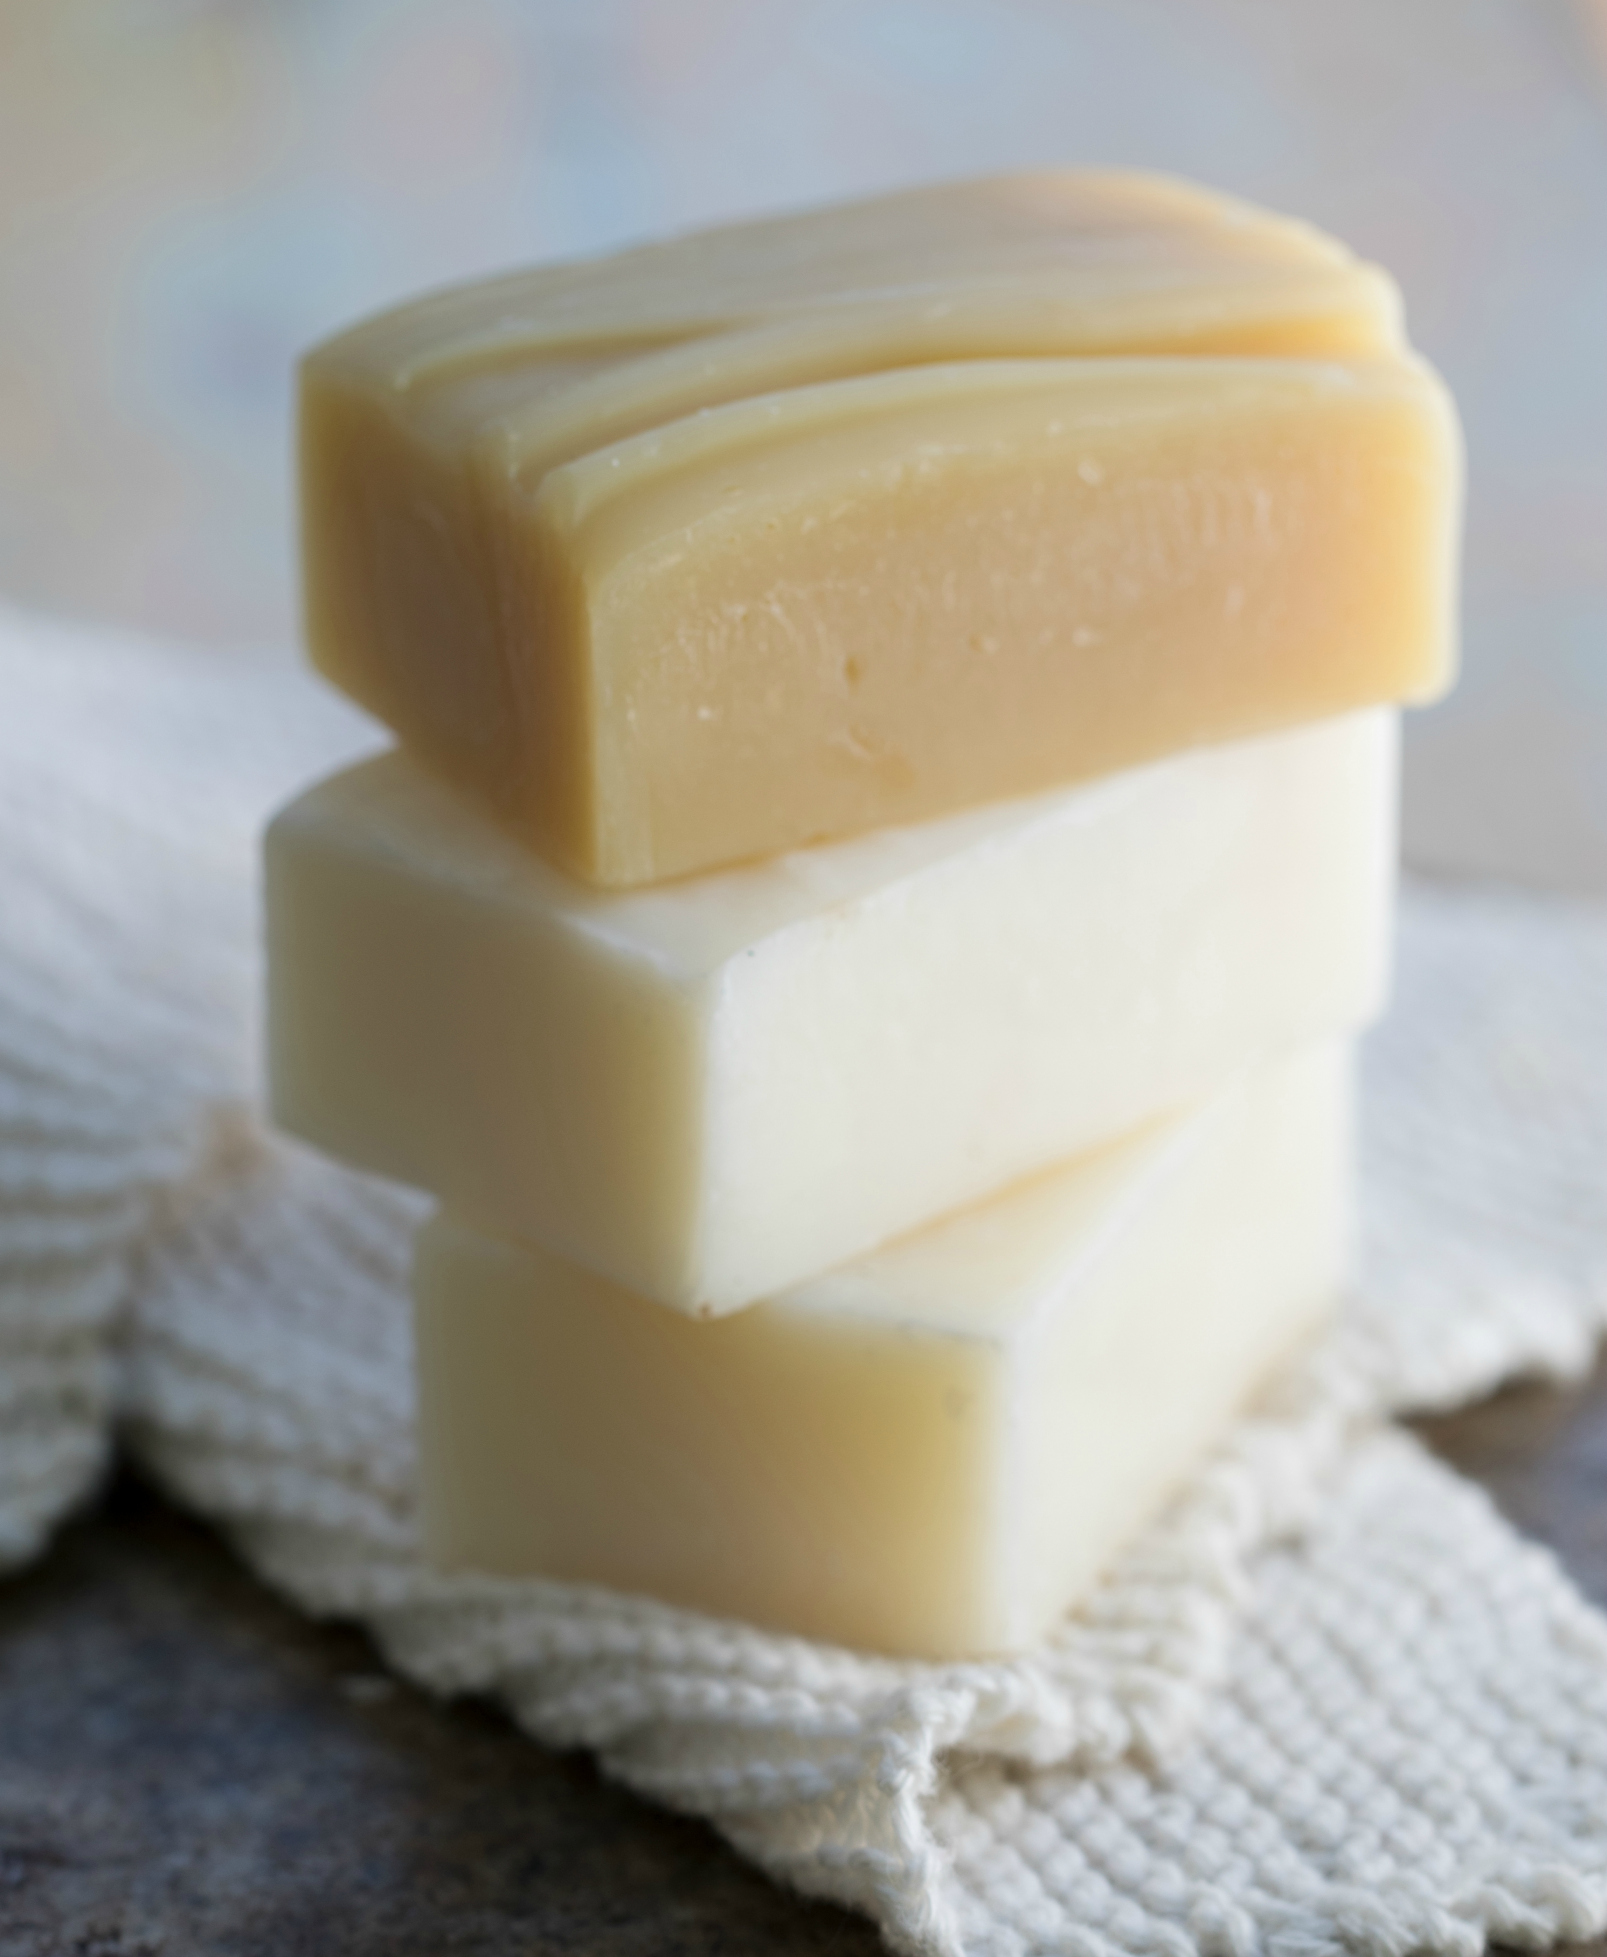 Goats Milk and Honey Soap Recipe for Beginners